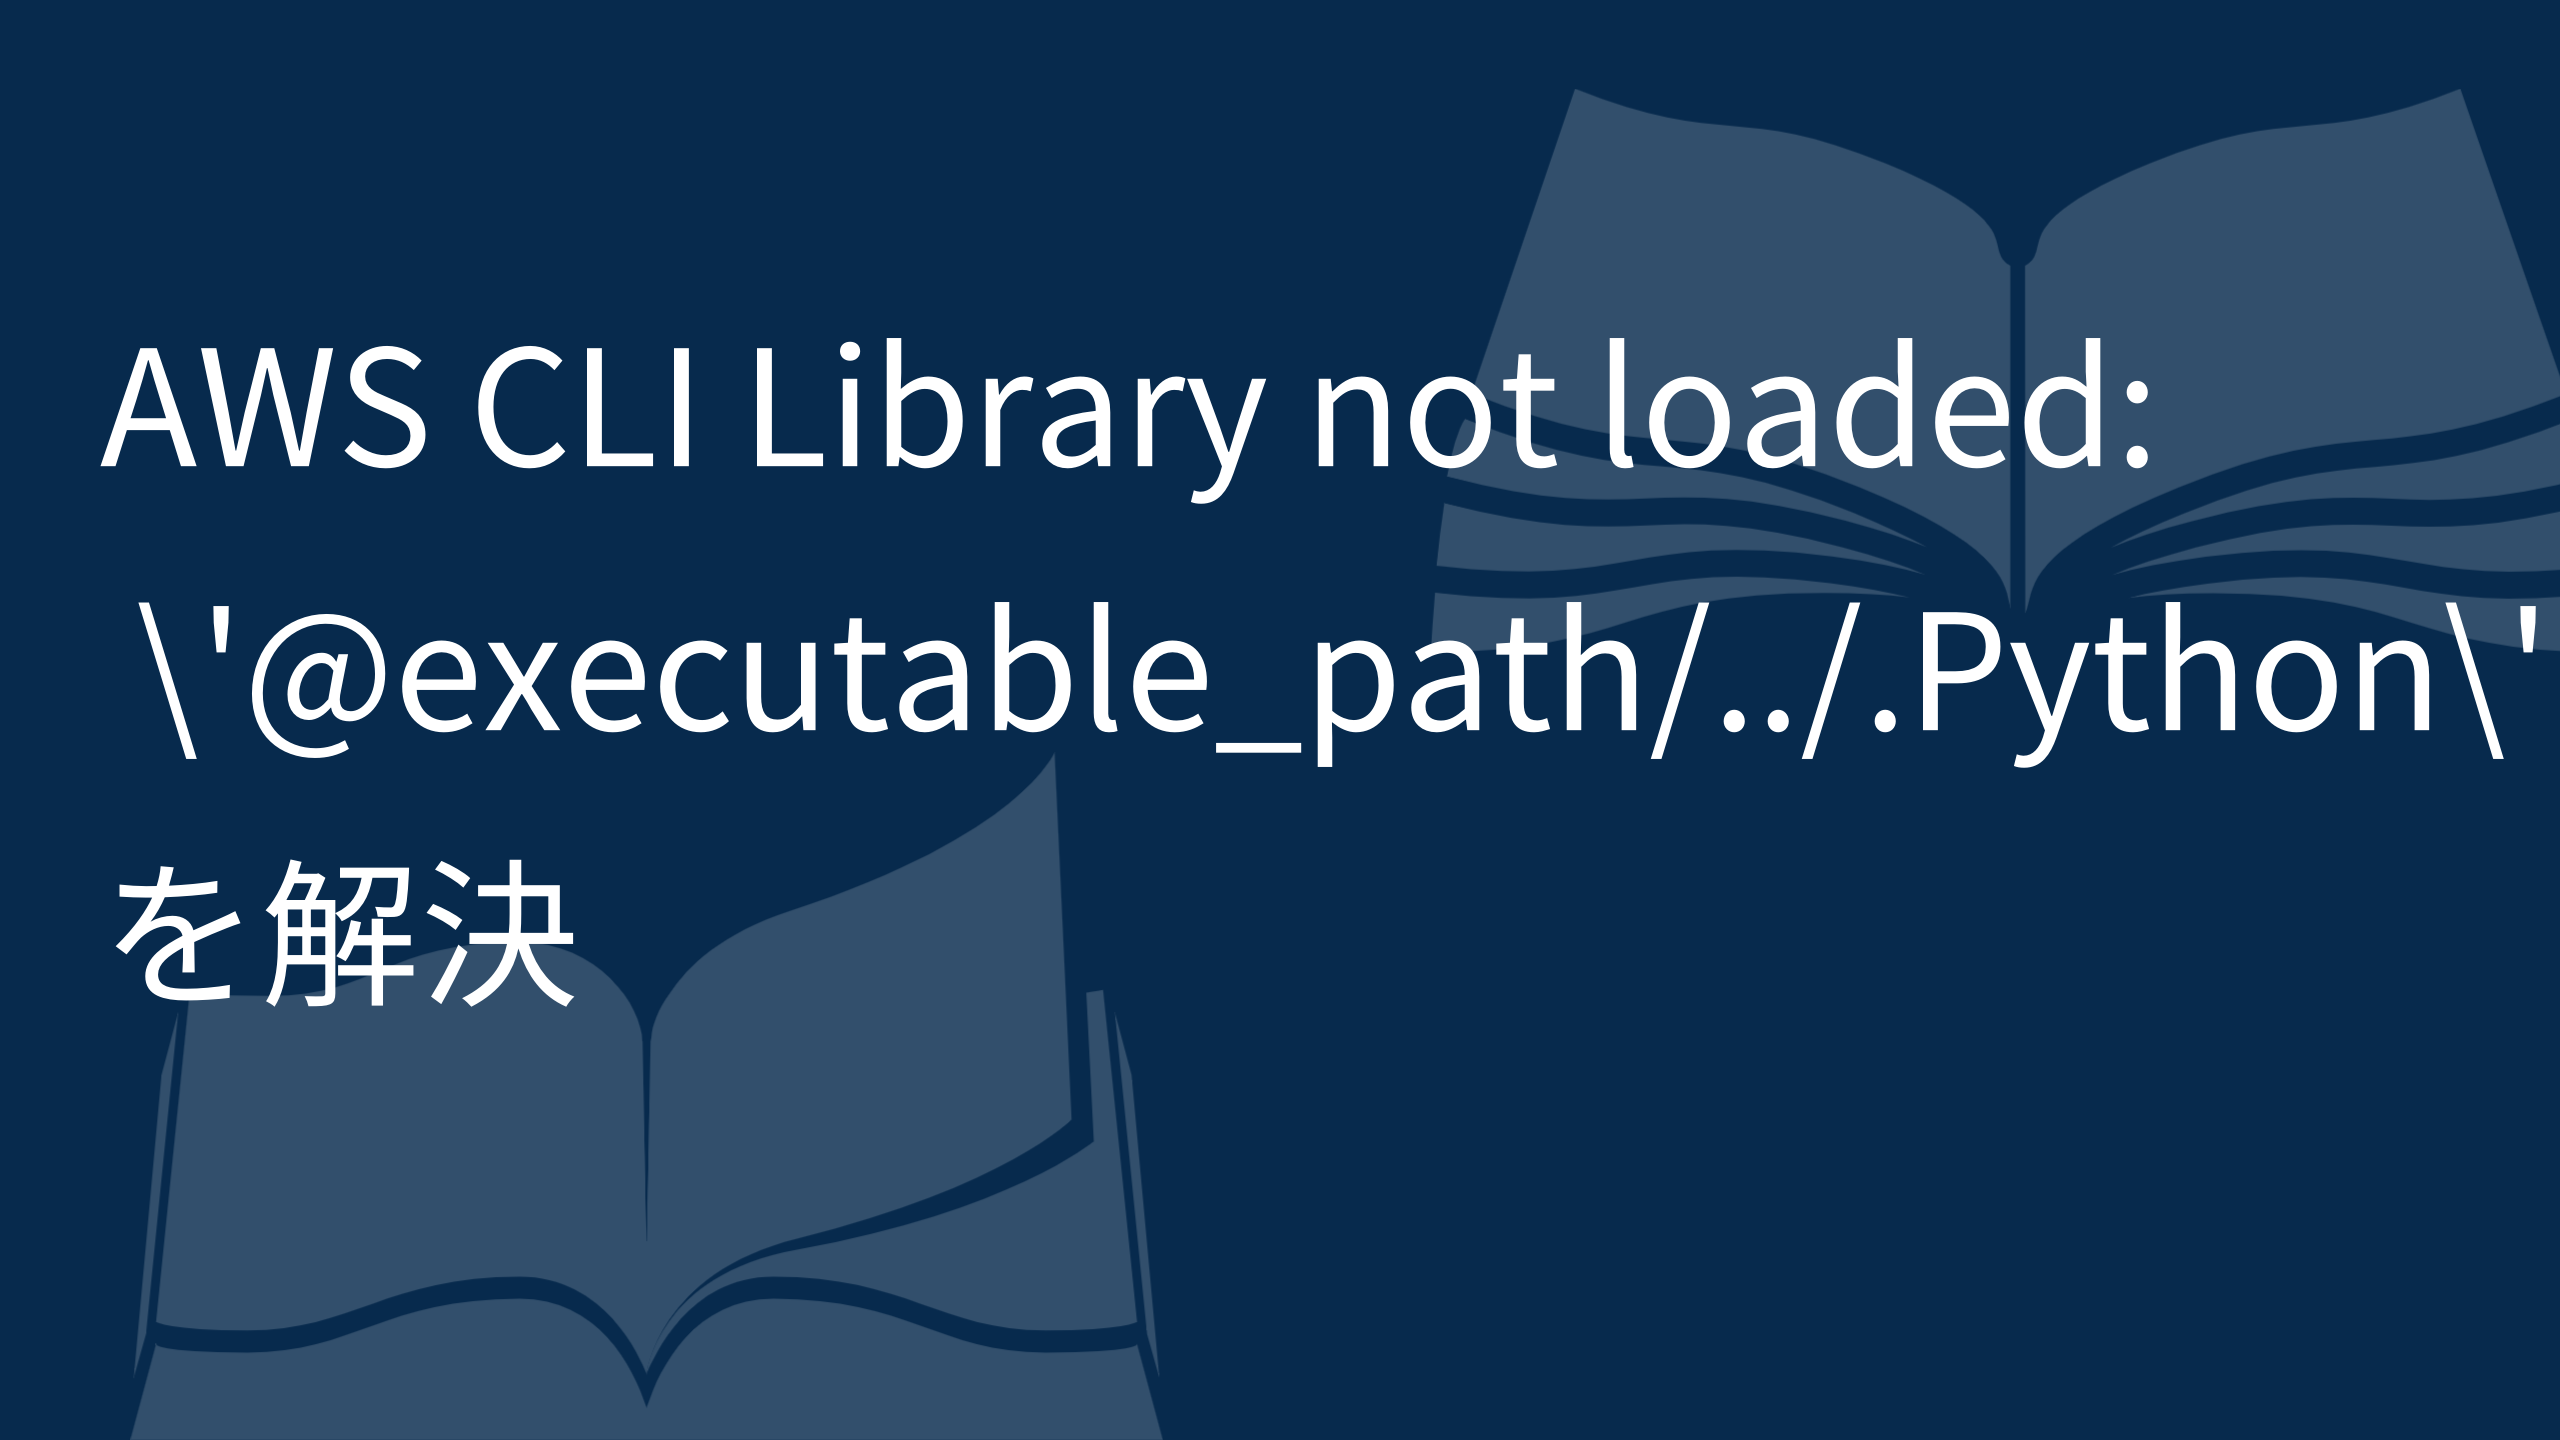 AWS CLI Library not loaded- '@executable_path:..:.Python'を解決